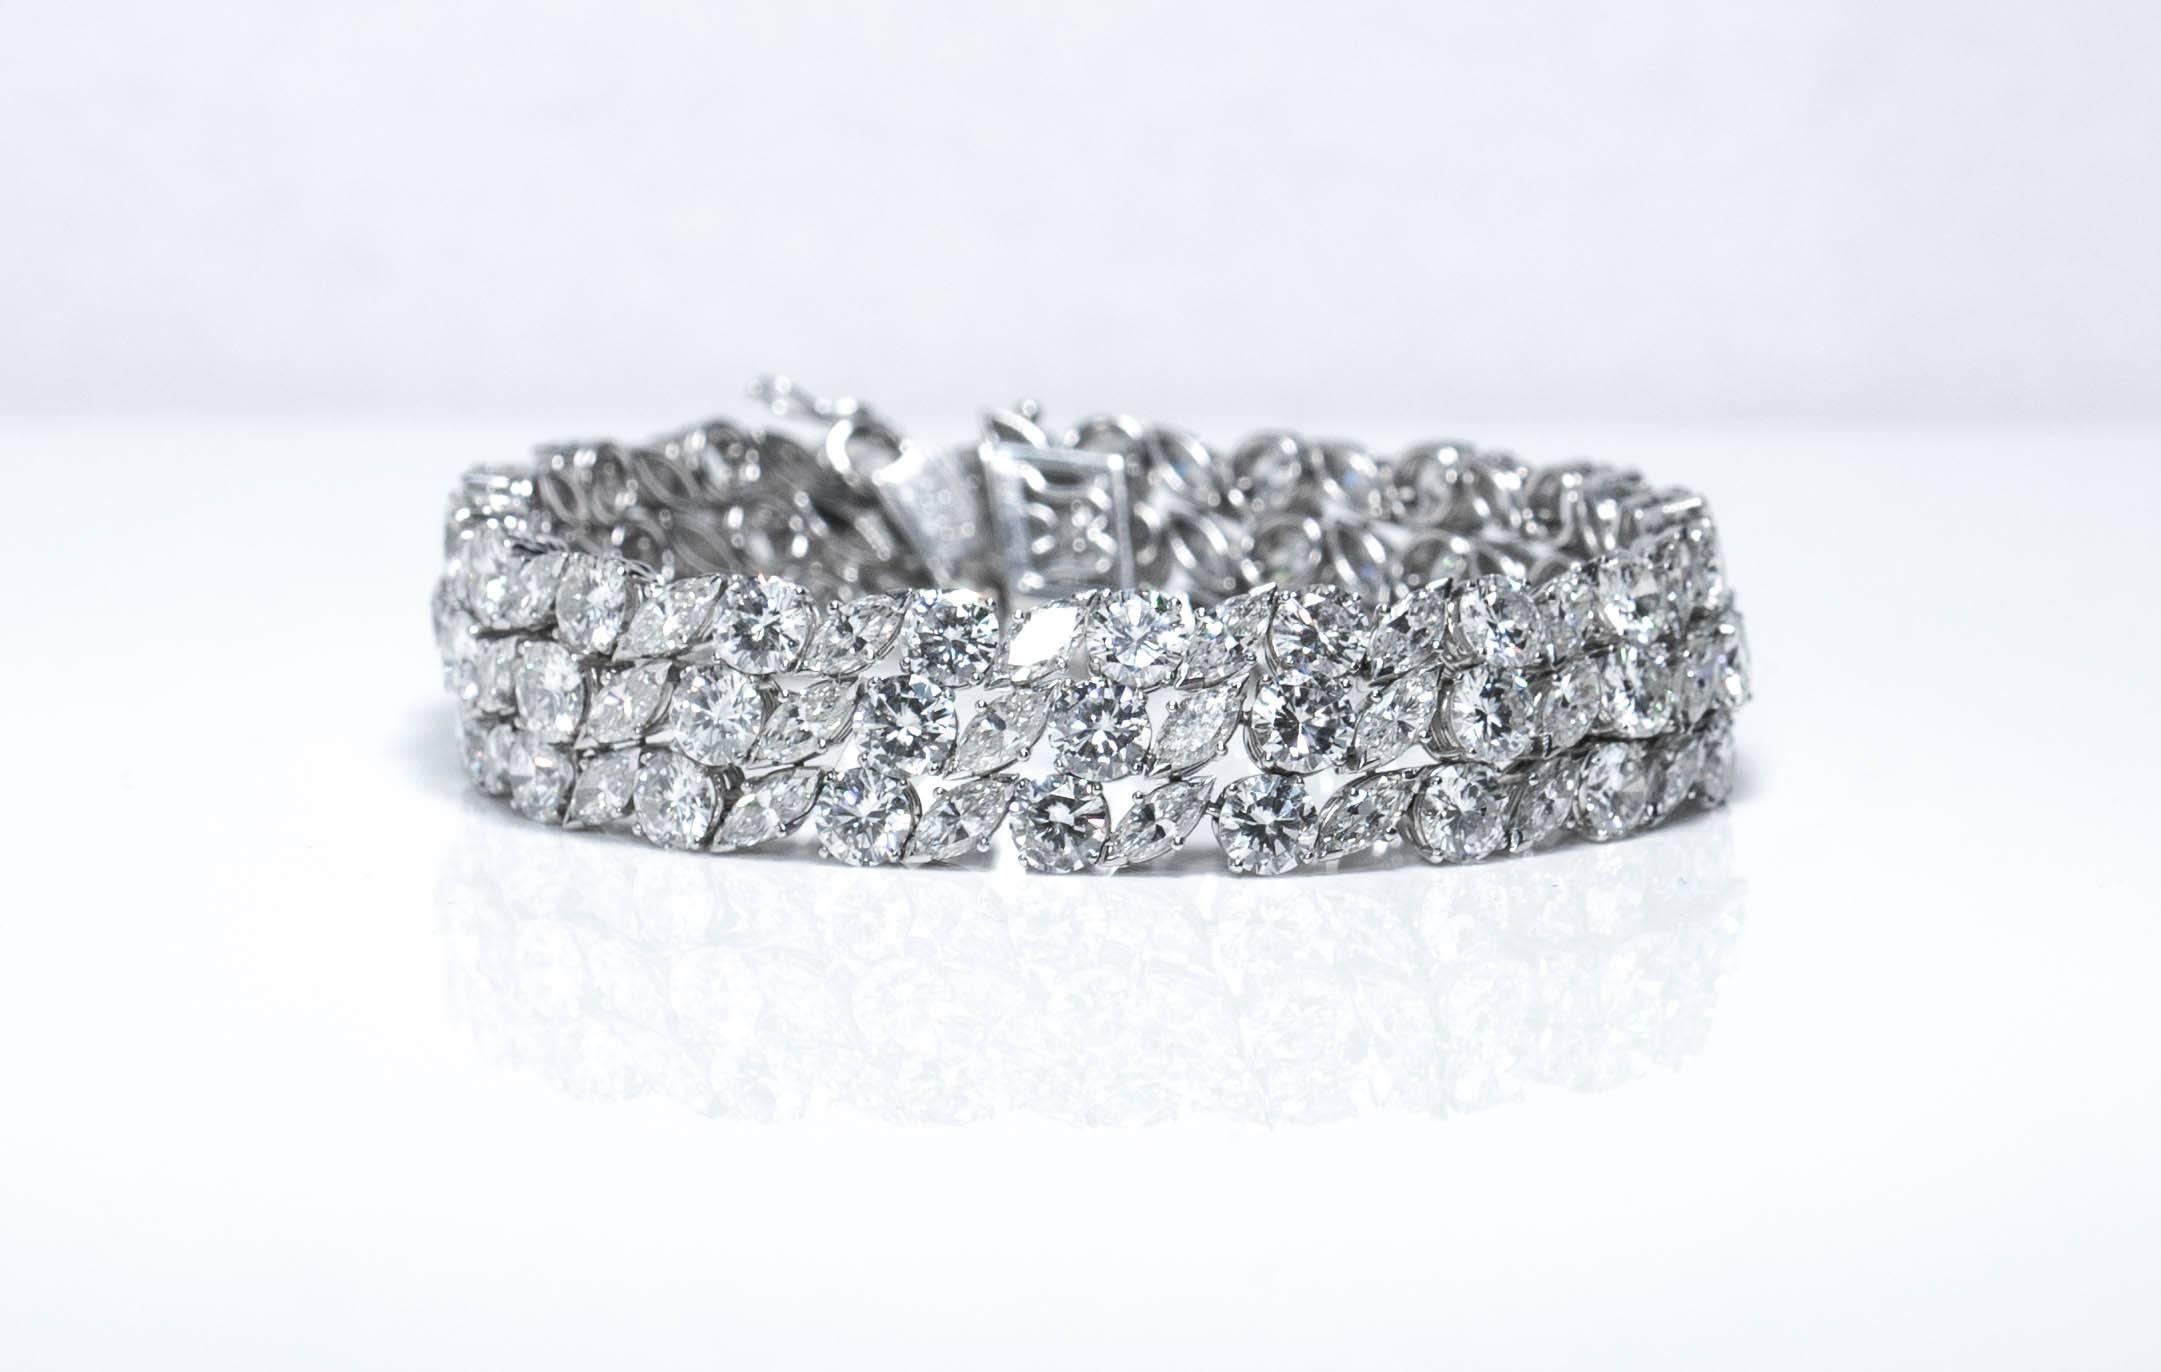 Platinum and diamond bracelet containing 114 Diamonds weighing 30 carats total. 
57 Round brilliants, and 57 Marquise brilliants. 
Handmade clasp design ,beautifully hides the closure.
